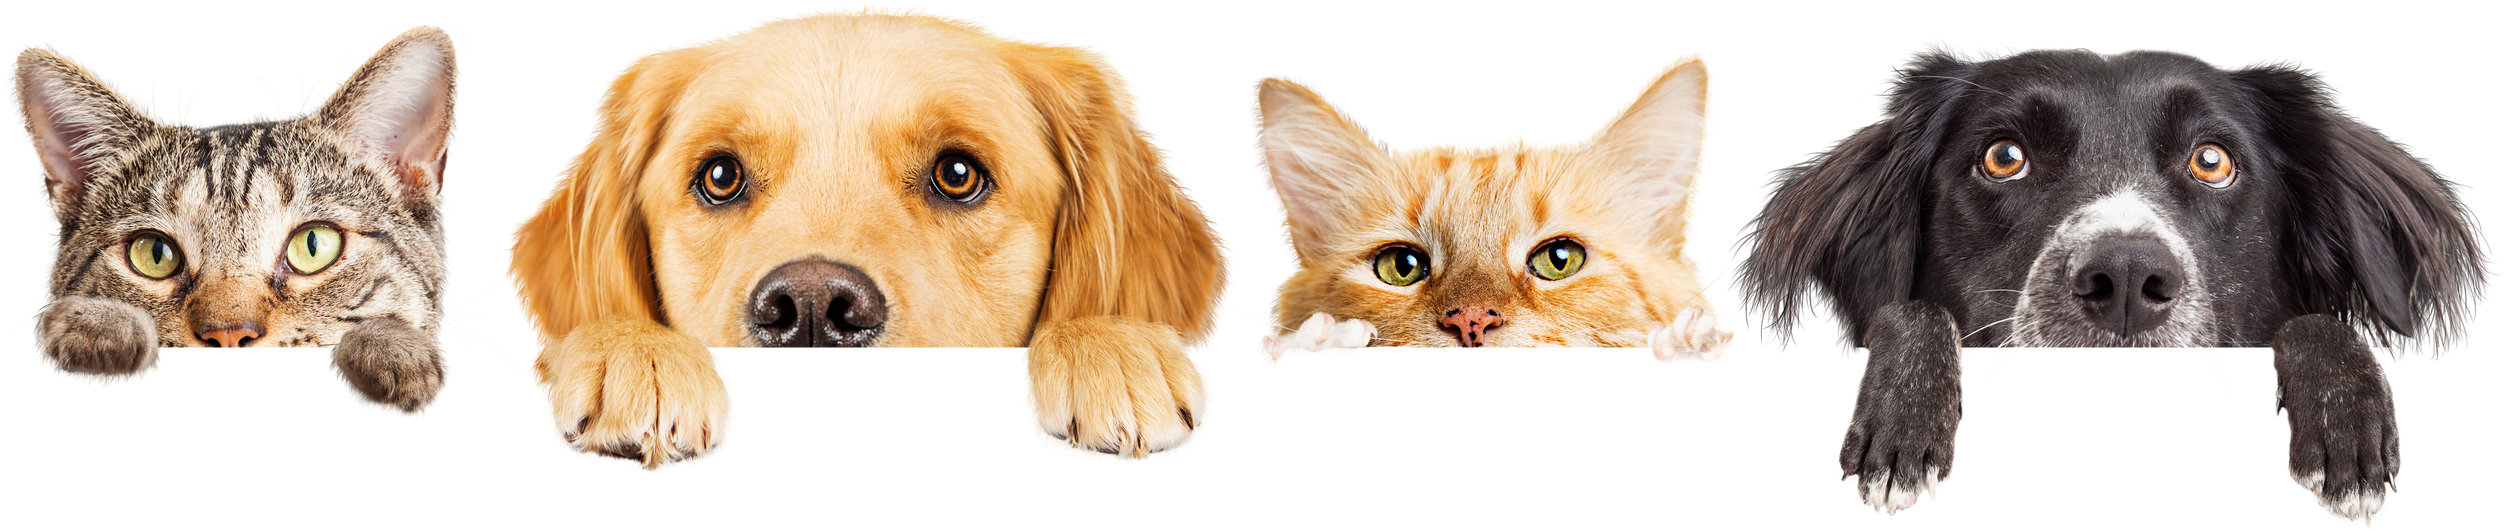 Dogs and Cats Peeking over Web Banner Extracted